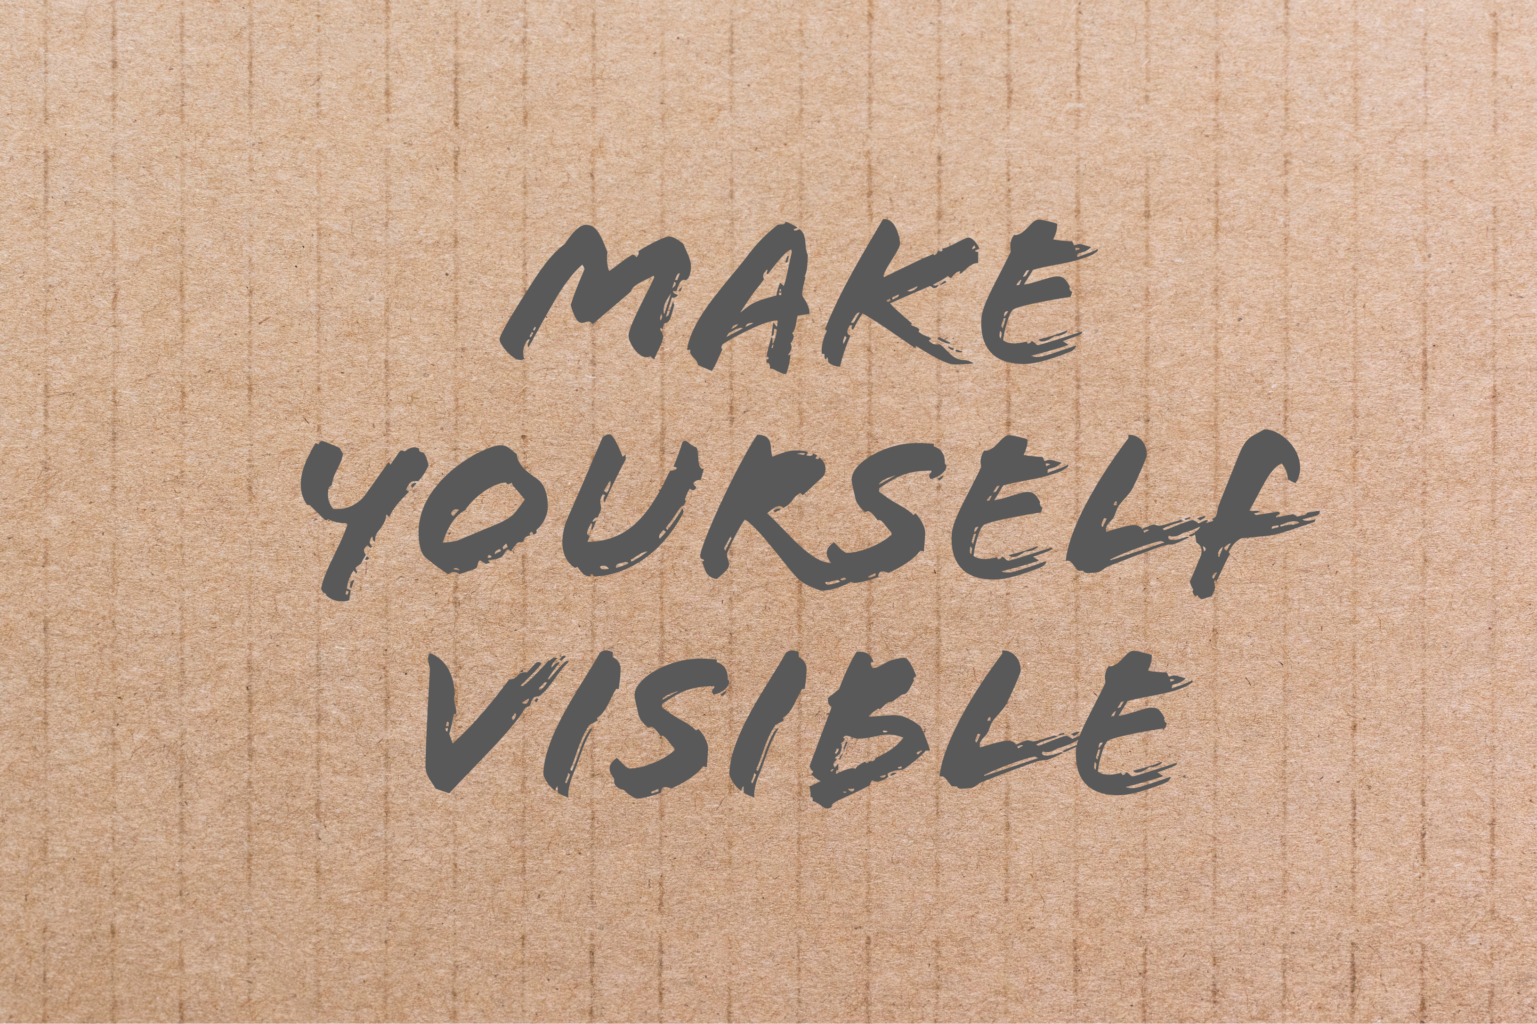 living with chronic conditions Make yourself visible!